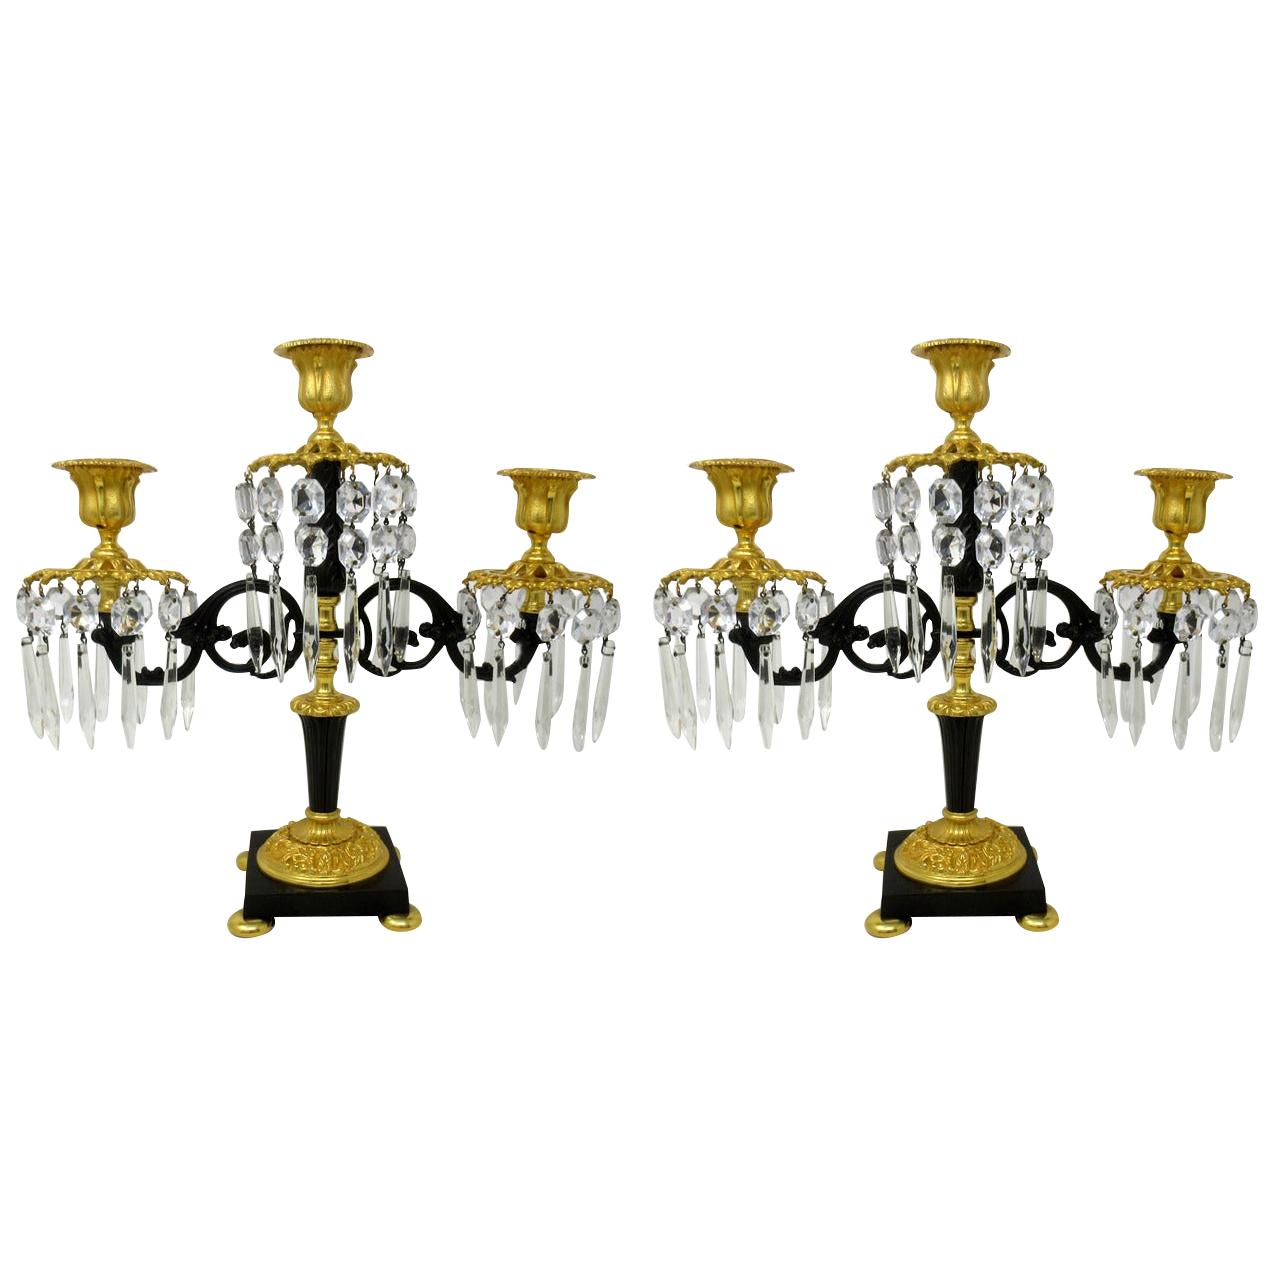 Antique Ormolu Bronze Dore Crystal Three Branch Candelabra French Lusters, Pair